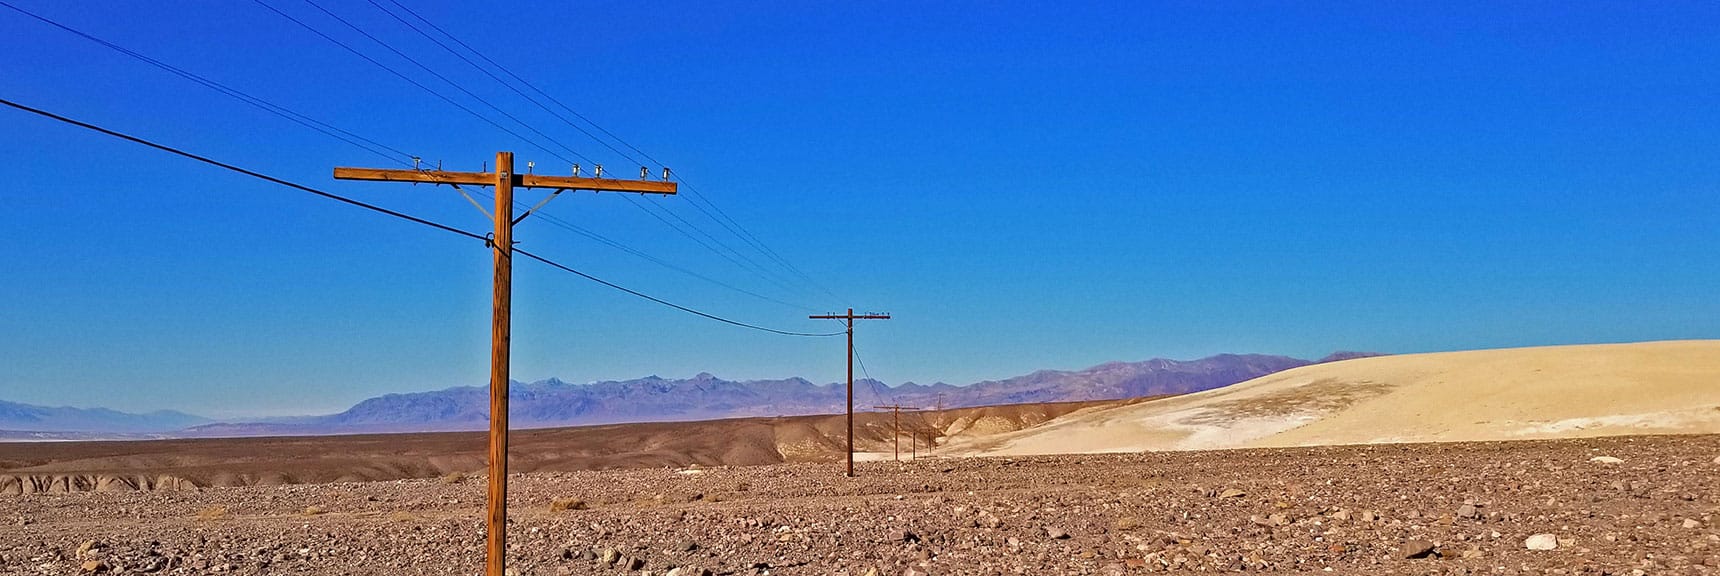 Old Power Lines. Note the Antique Glass Powerline Insulators. | Tea House & Table Rock Circuit | Furnace Creek | Death Valley National Park, California